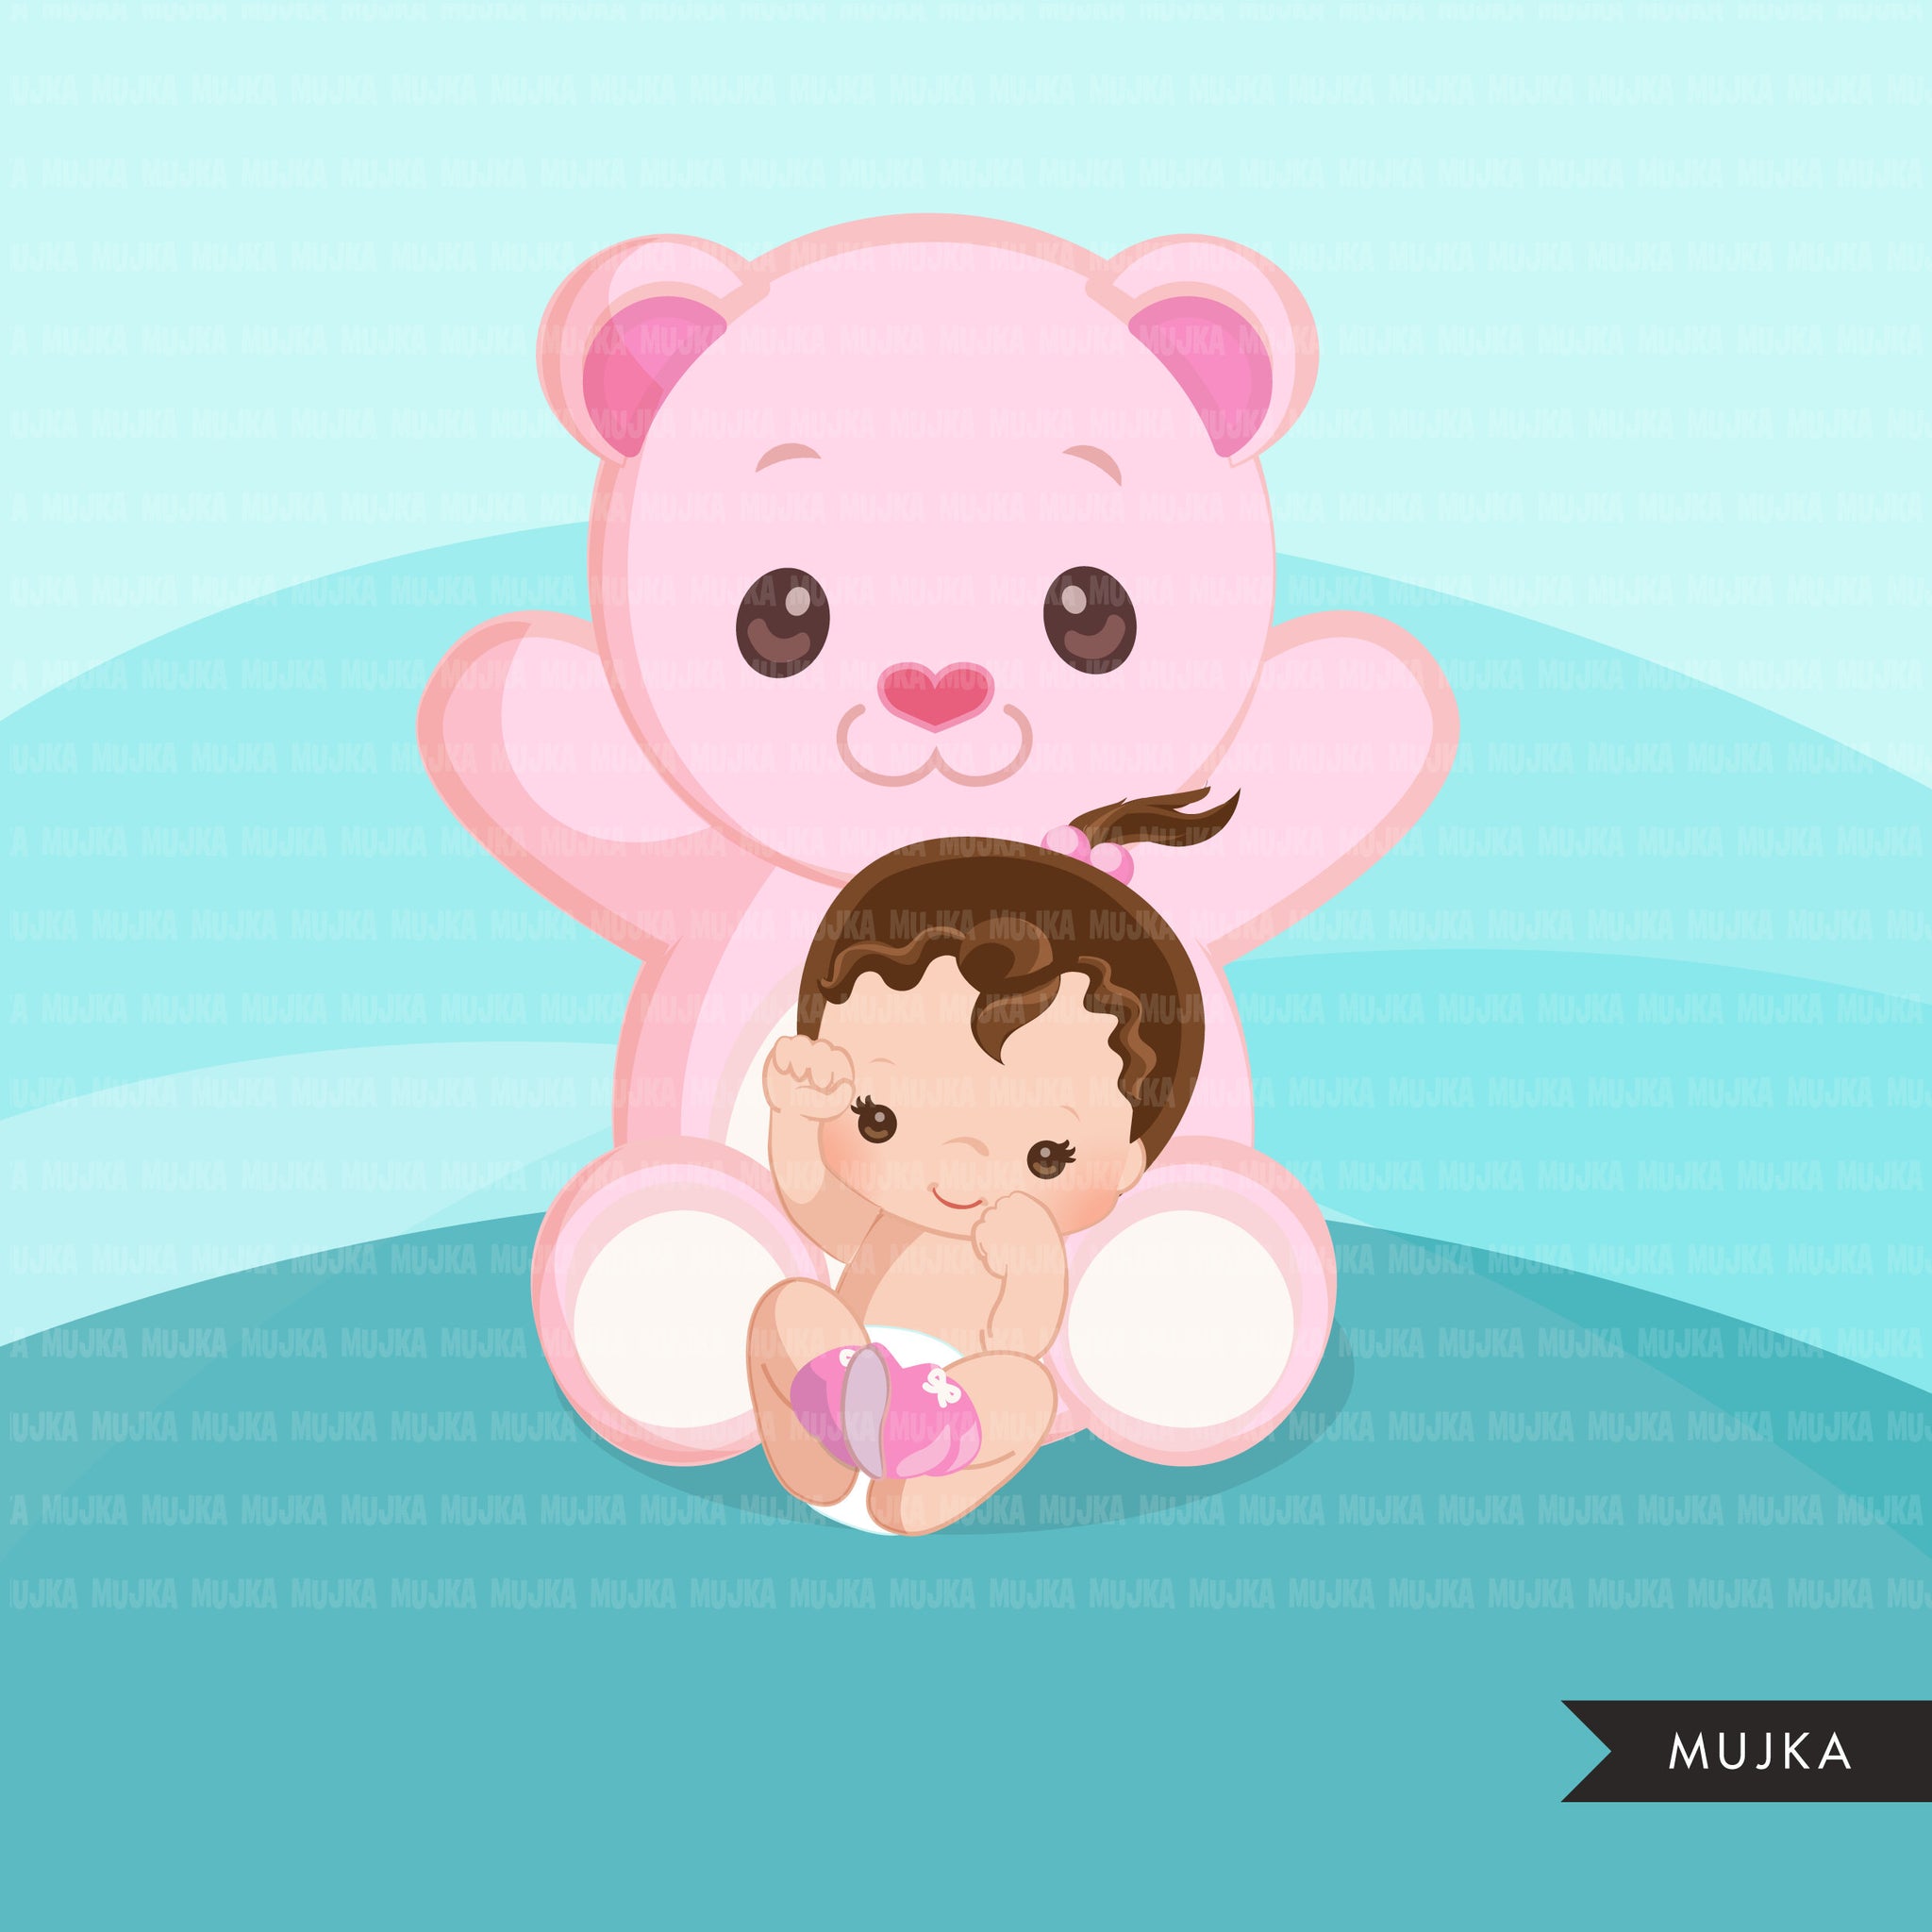 cute baby shower clipart